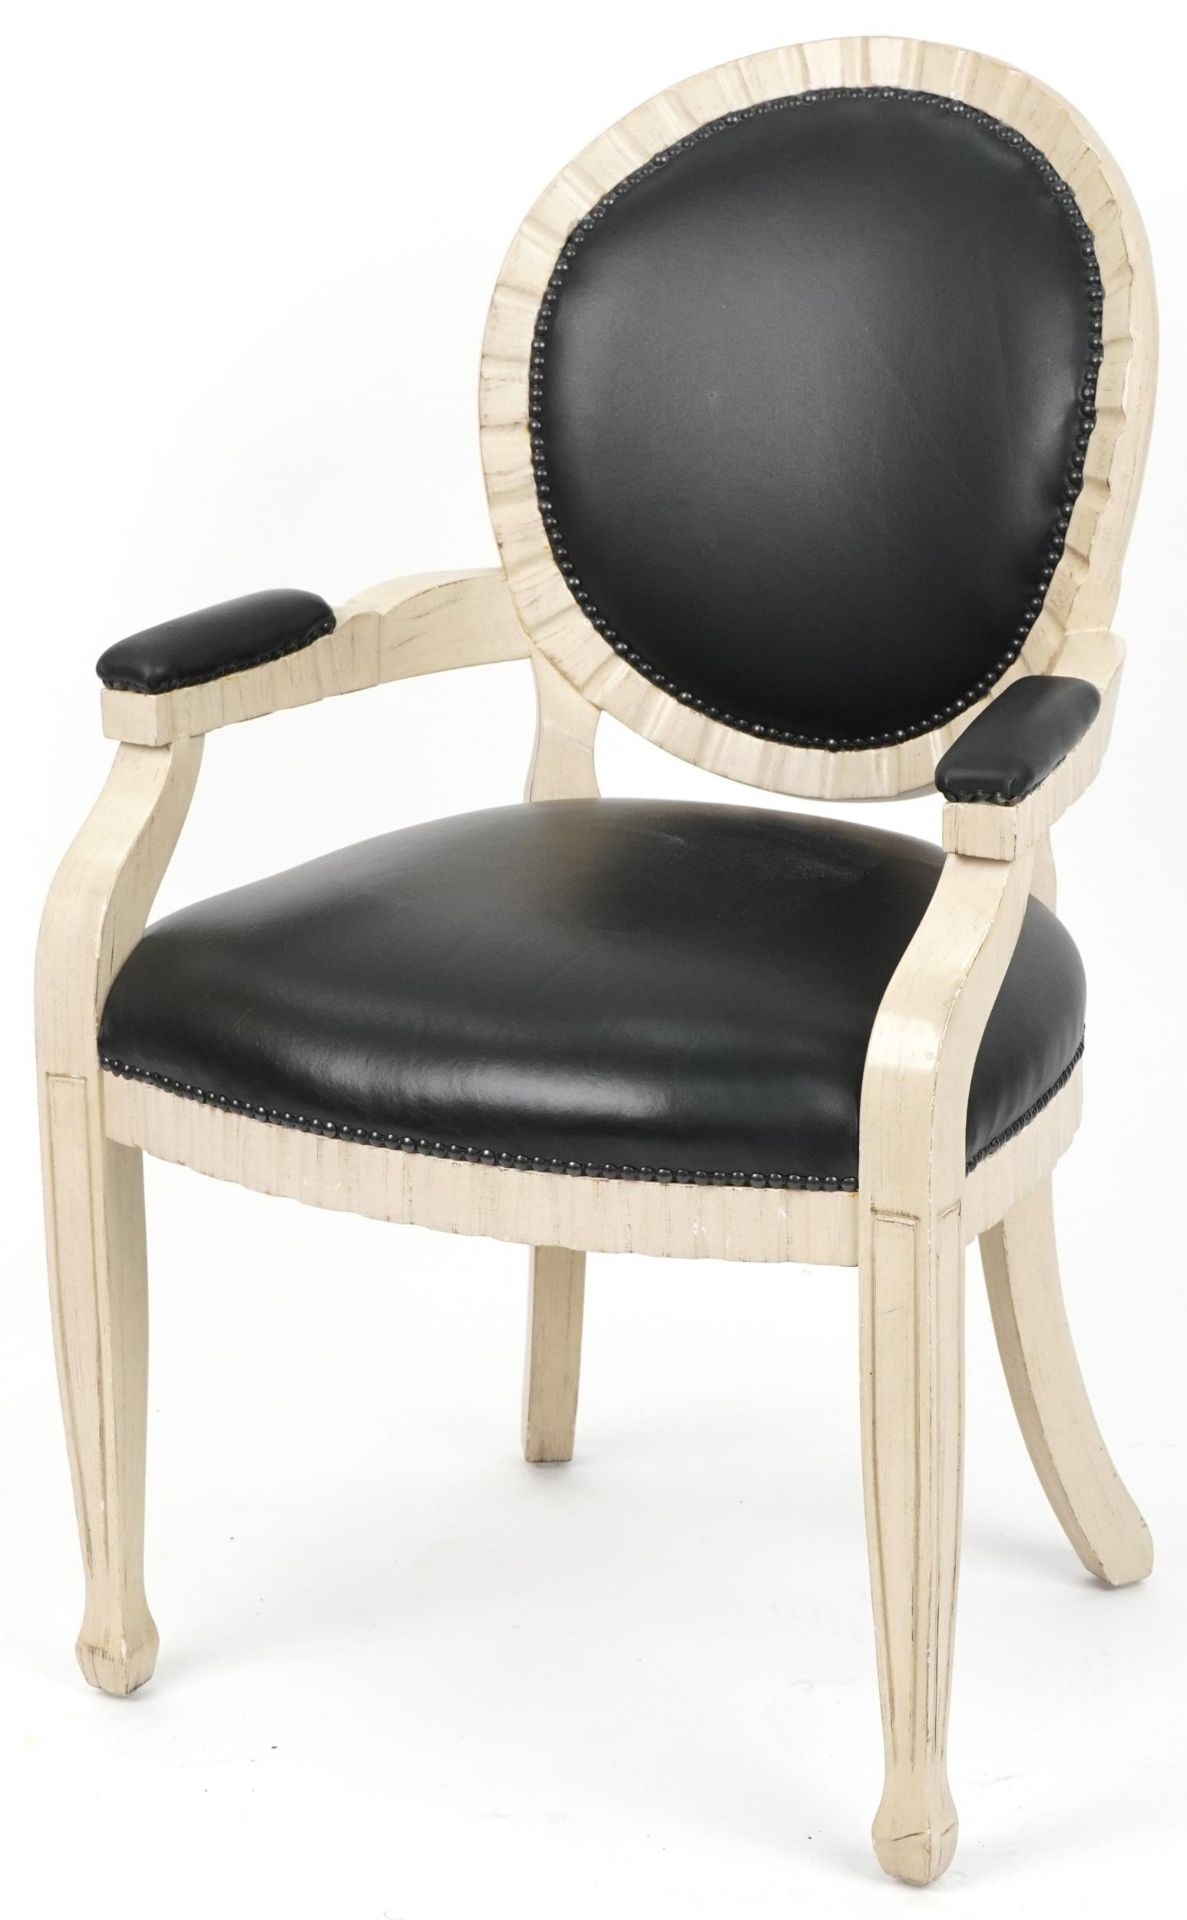 French Empire style cream bedroom chair with black vinyl upholstered back, seat and elbow pads, 98.